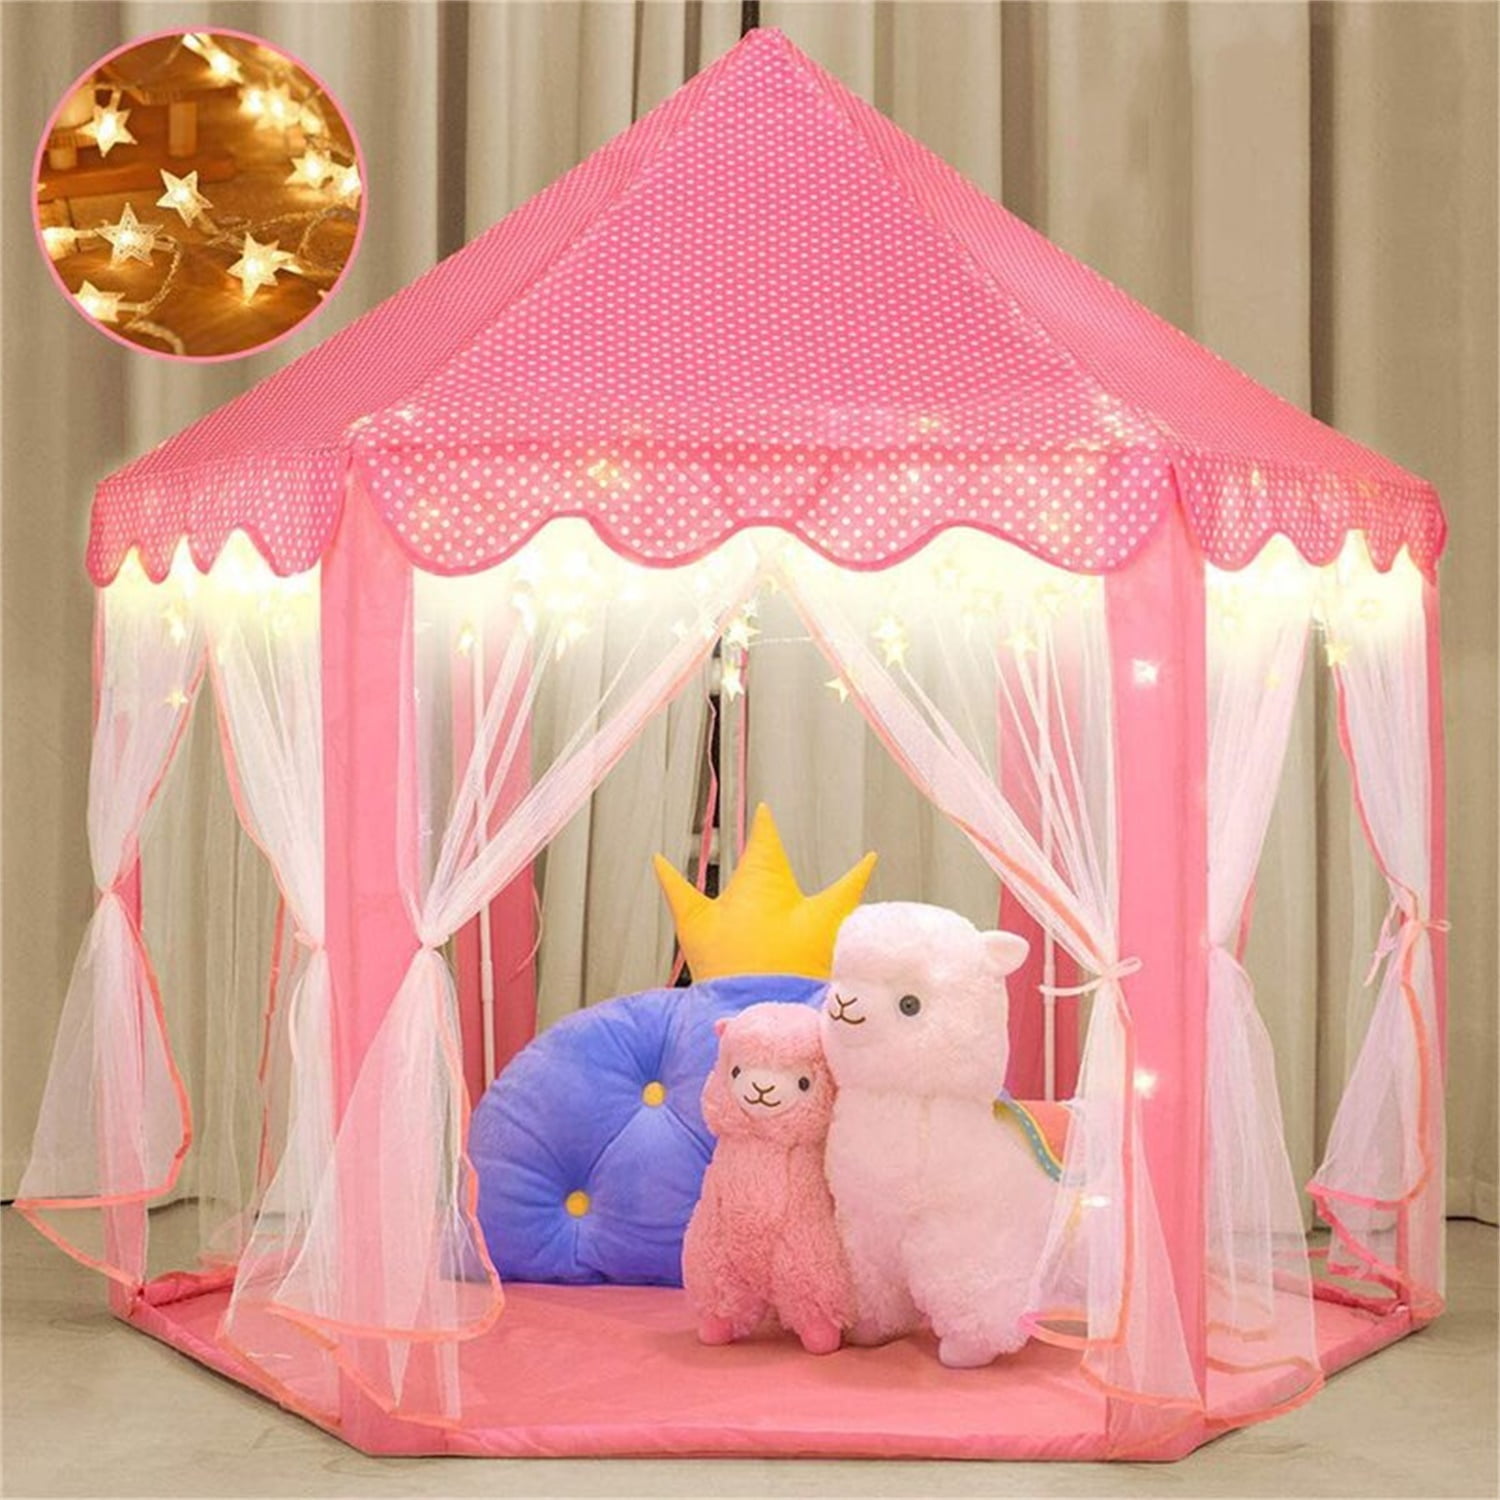 Moon Pink Kids Play Tent Kids Teepee Tent Princess Castle Play Tent Children Playhouse with Bonus LED Star Lights for Indoor Outdoor with Carry Bag Portable Playhouse Boys & Girls Birthday Gift 